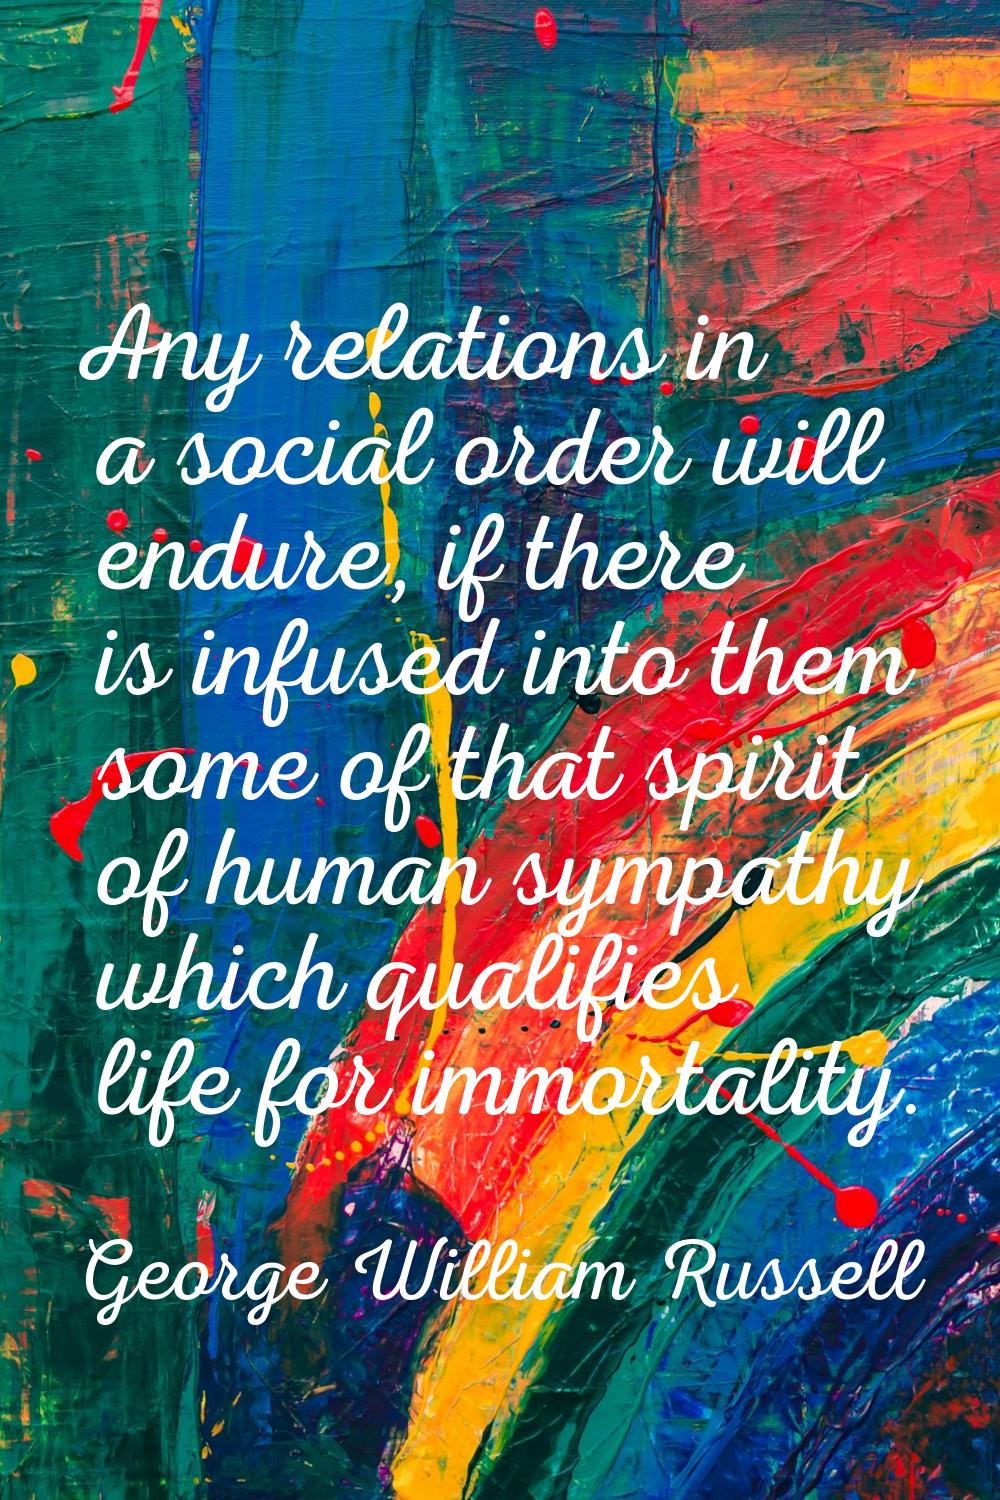 Any relations in a social order will endure, if there is infused into them some of that spirit of h